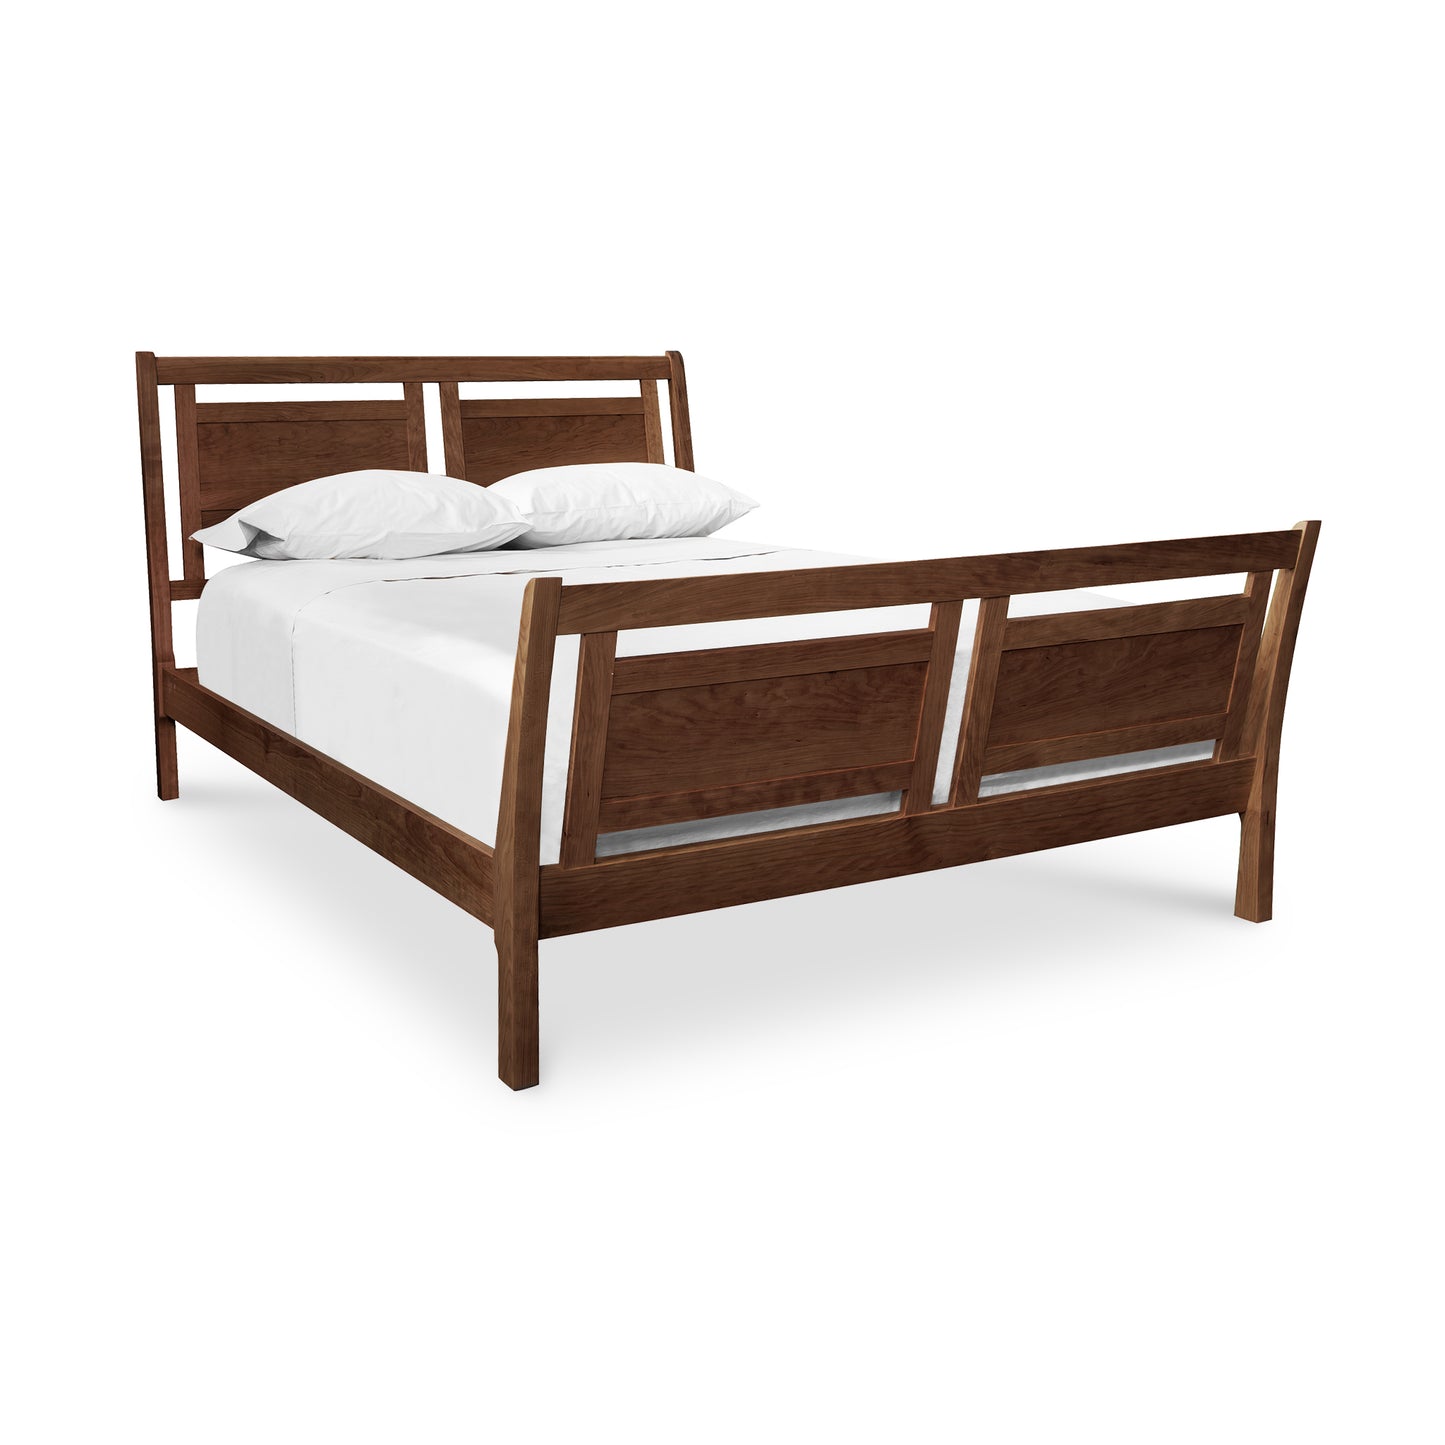 A handcrafted Vermont Furniture Designs Incline Sleigh Bed frame with an eco-friendly white mattress and pillows set against a white background.